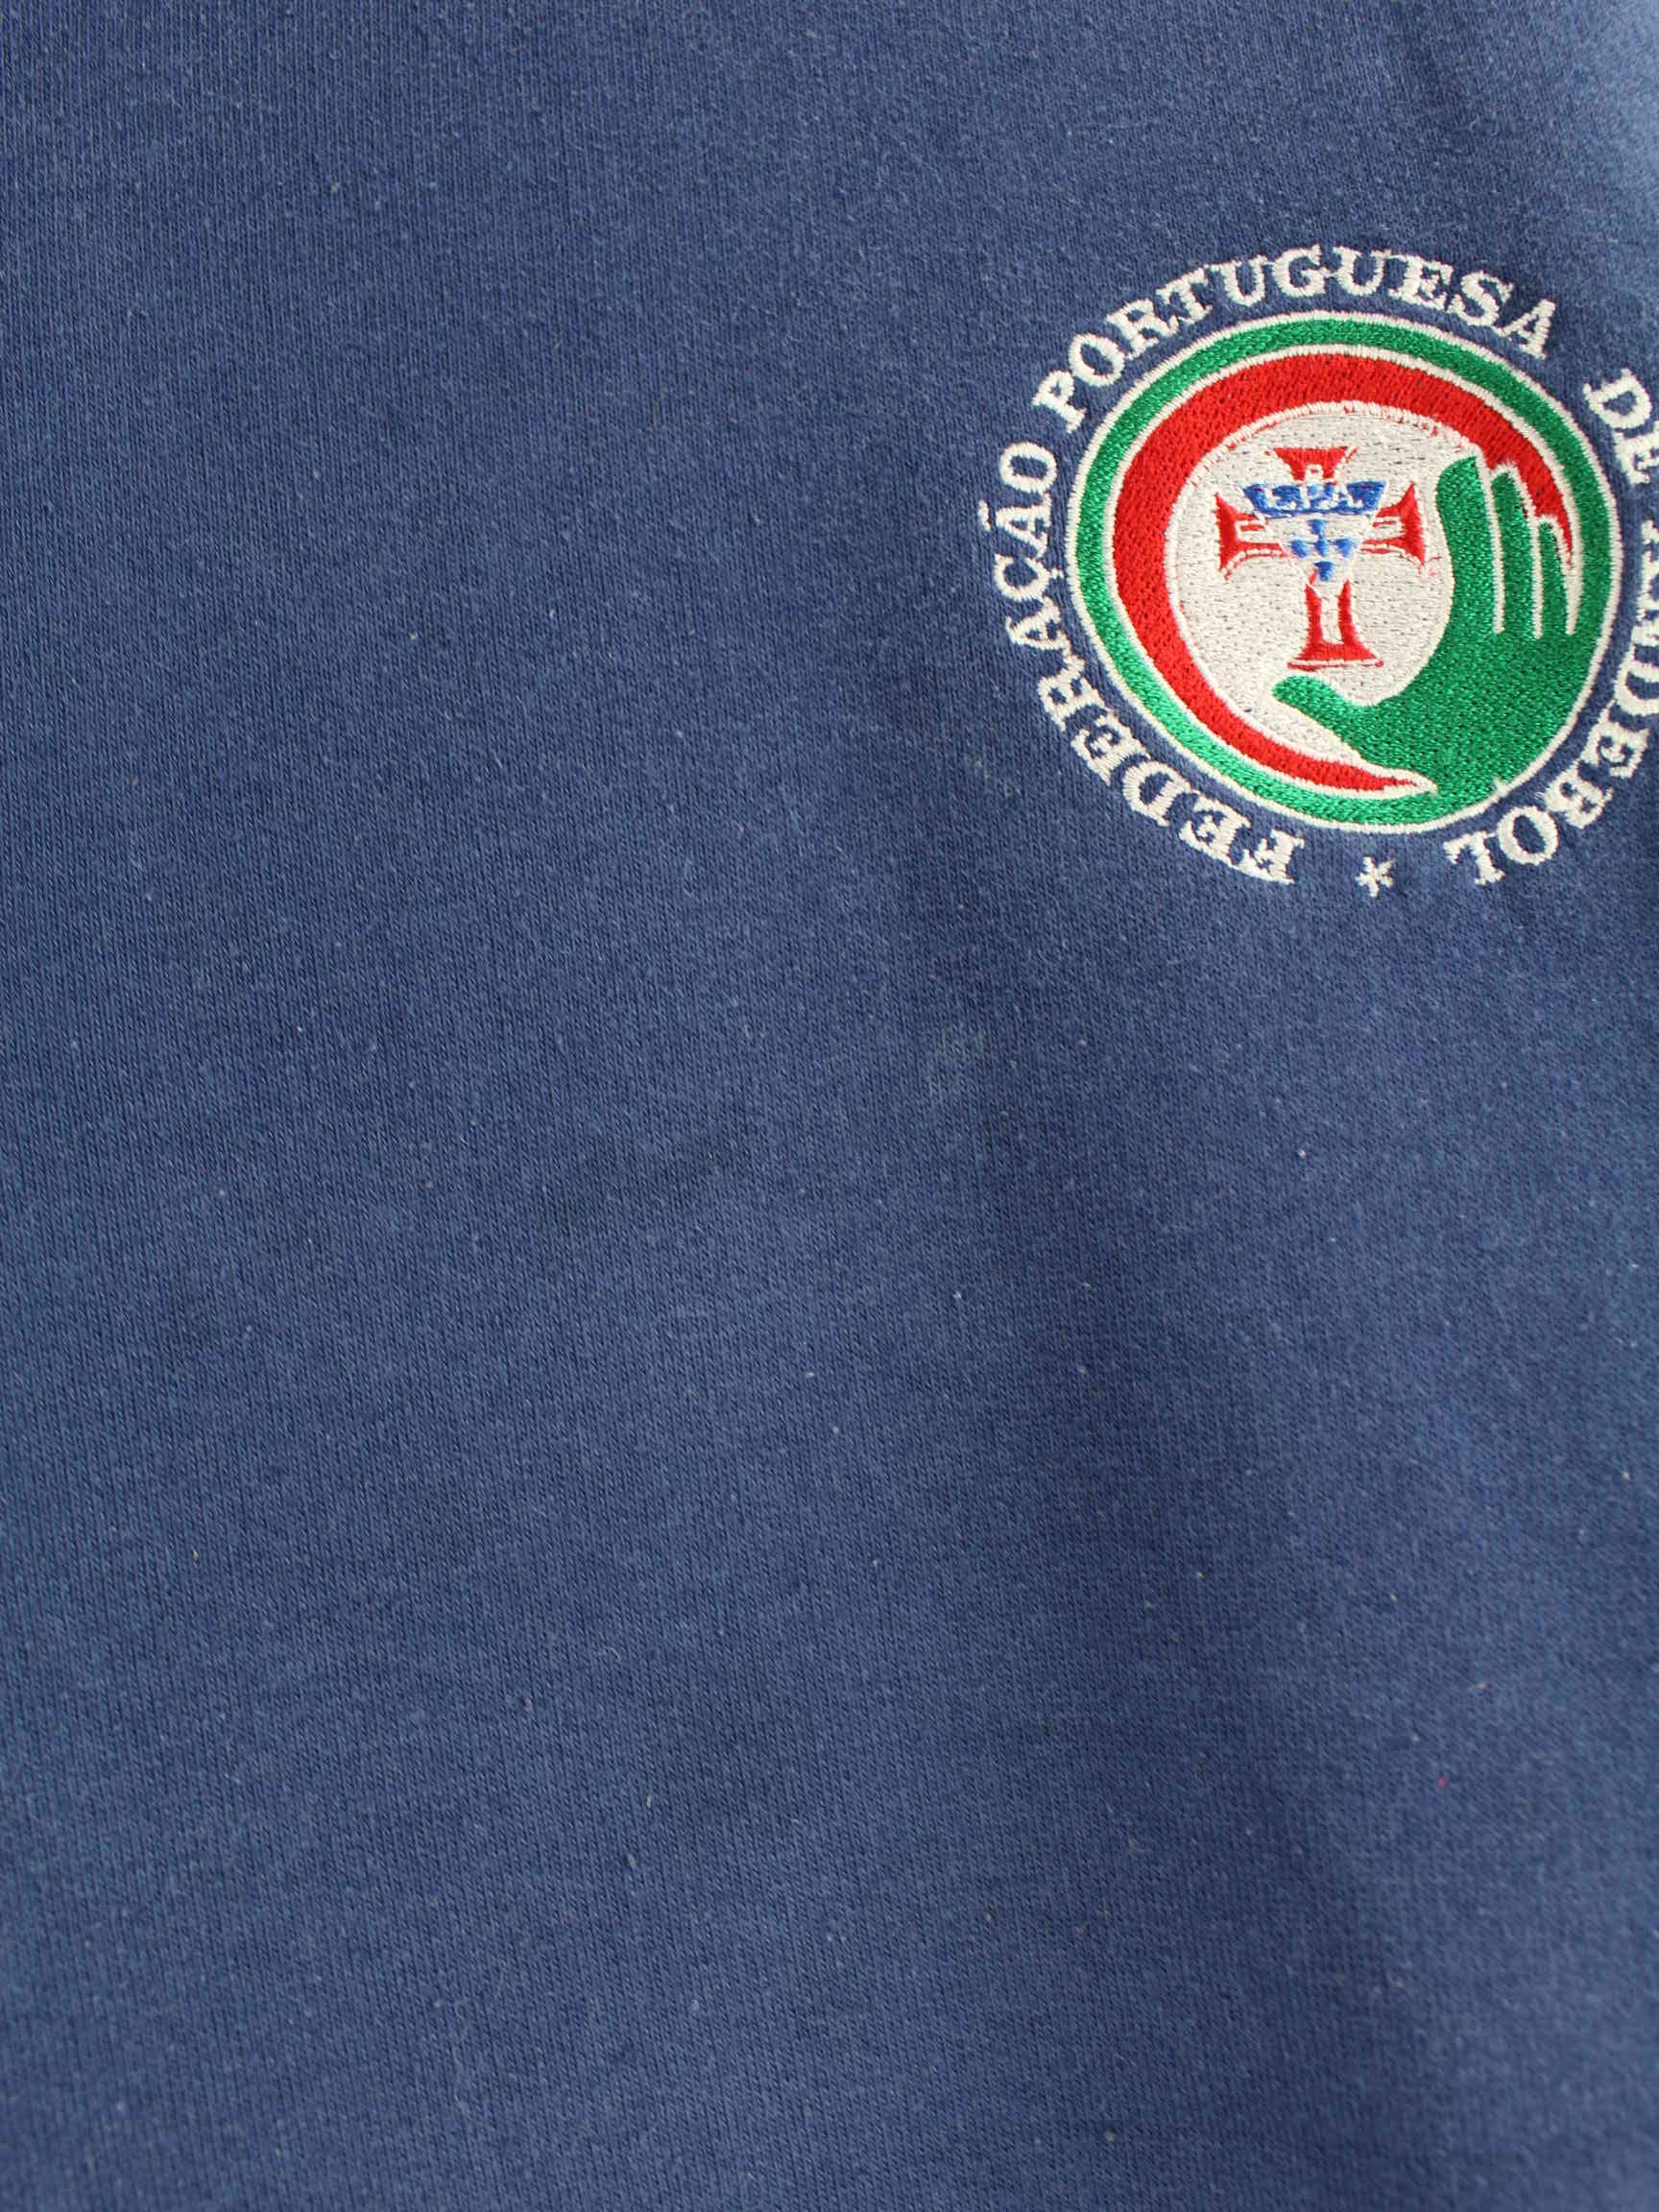 Adidas 80s Vintage Portugal Embroidered Sweater Blau XL (detail image 4)